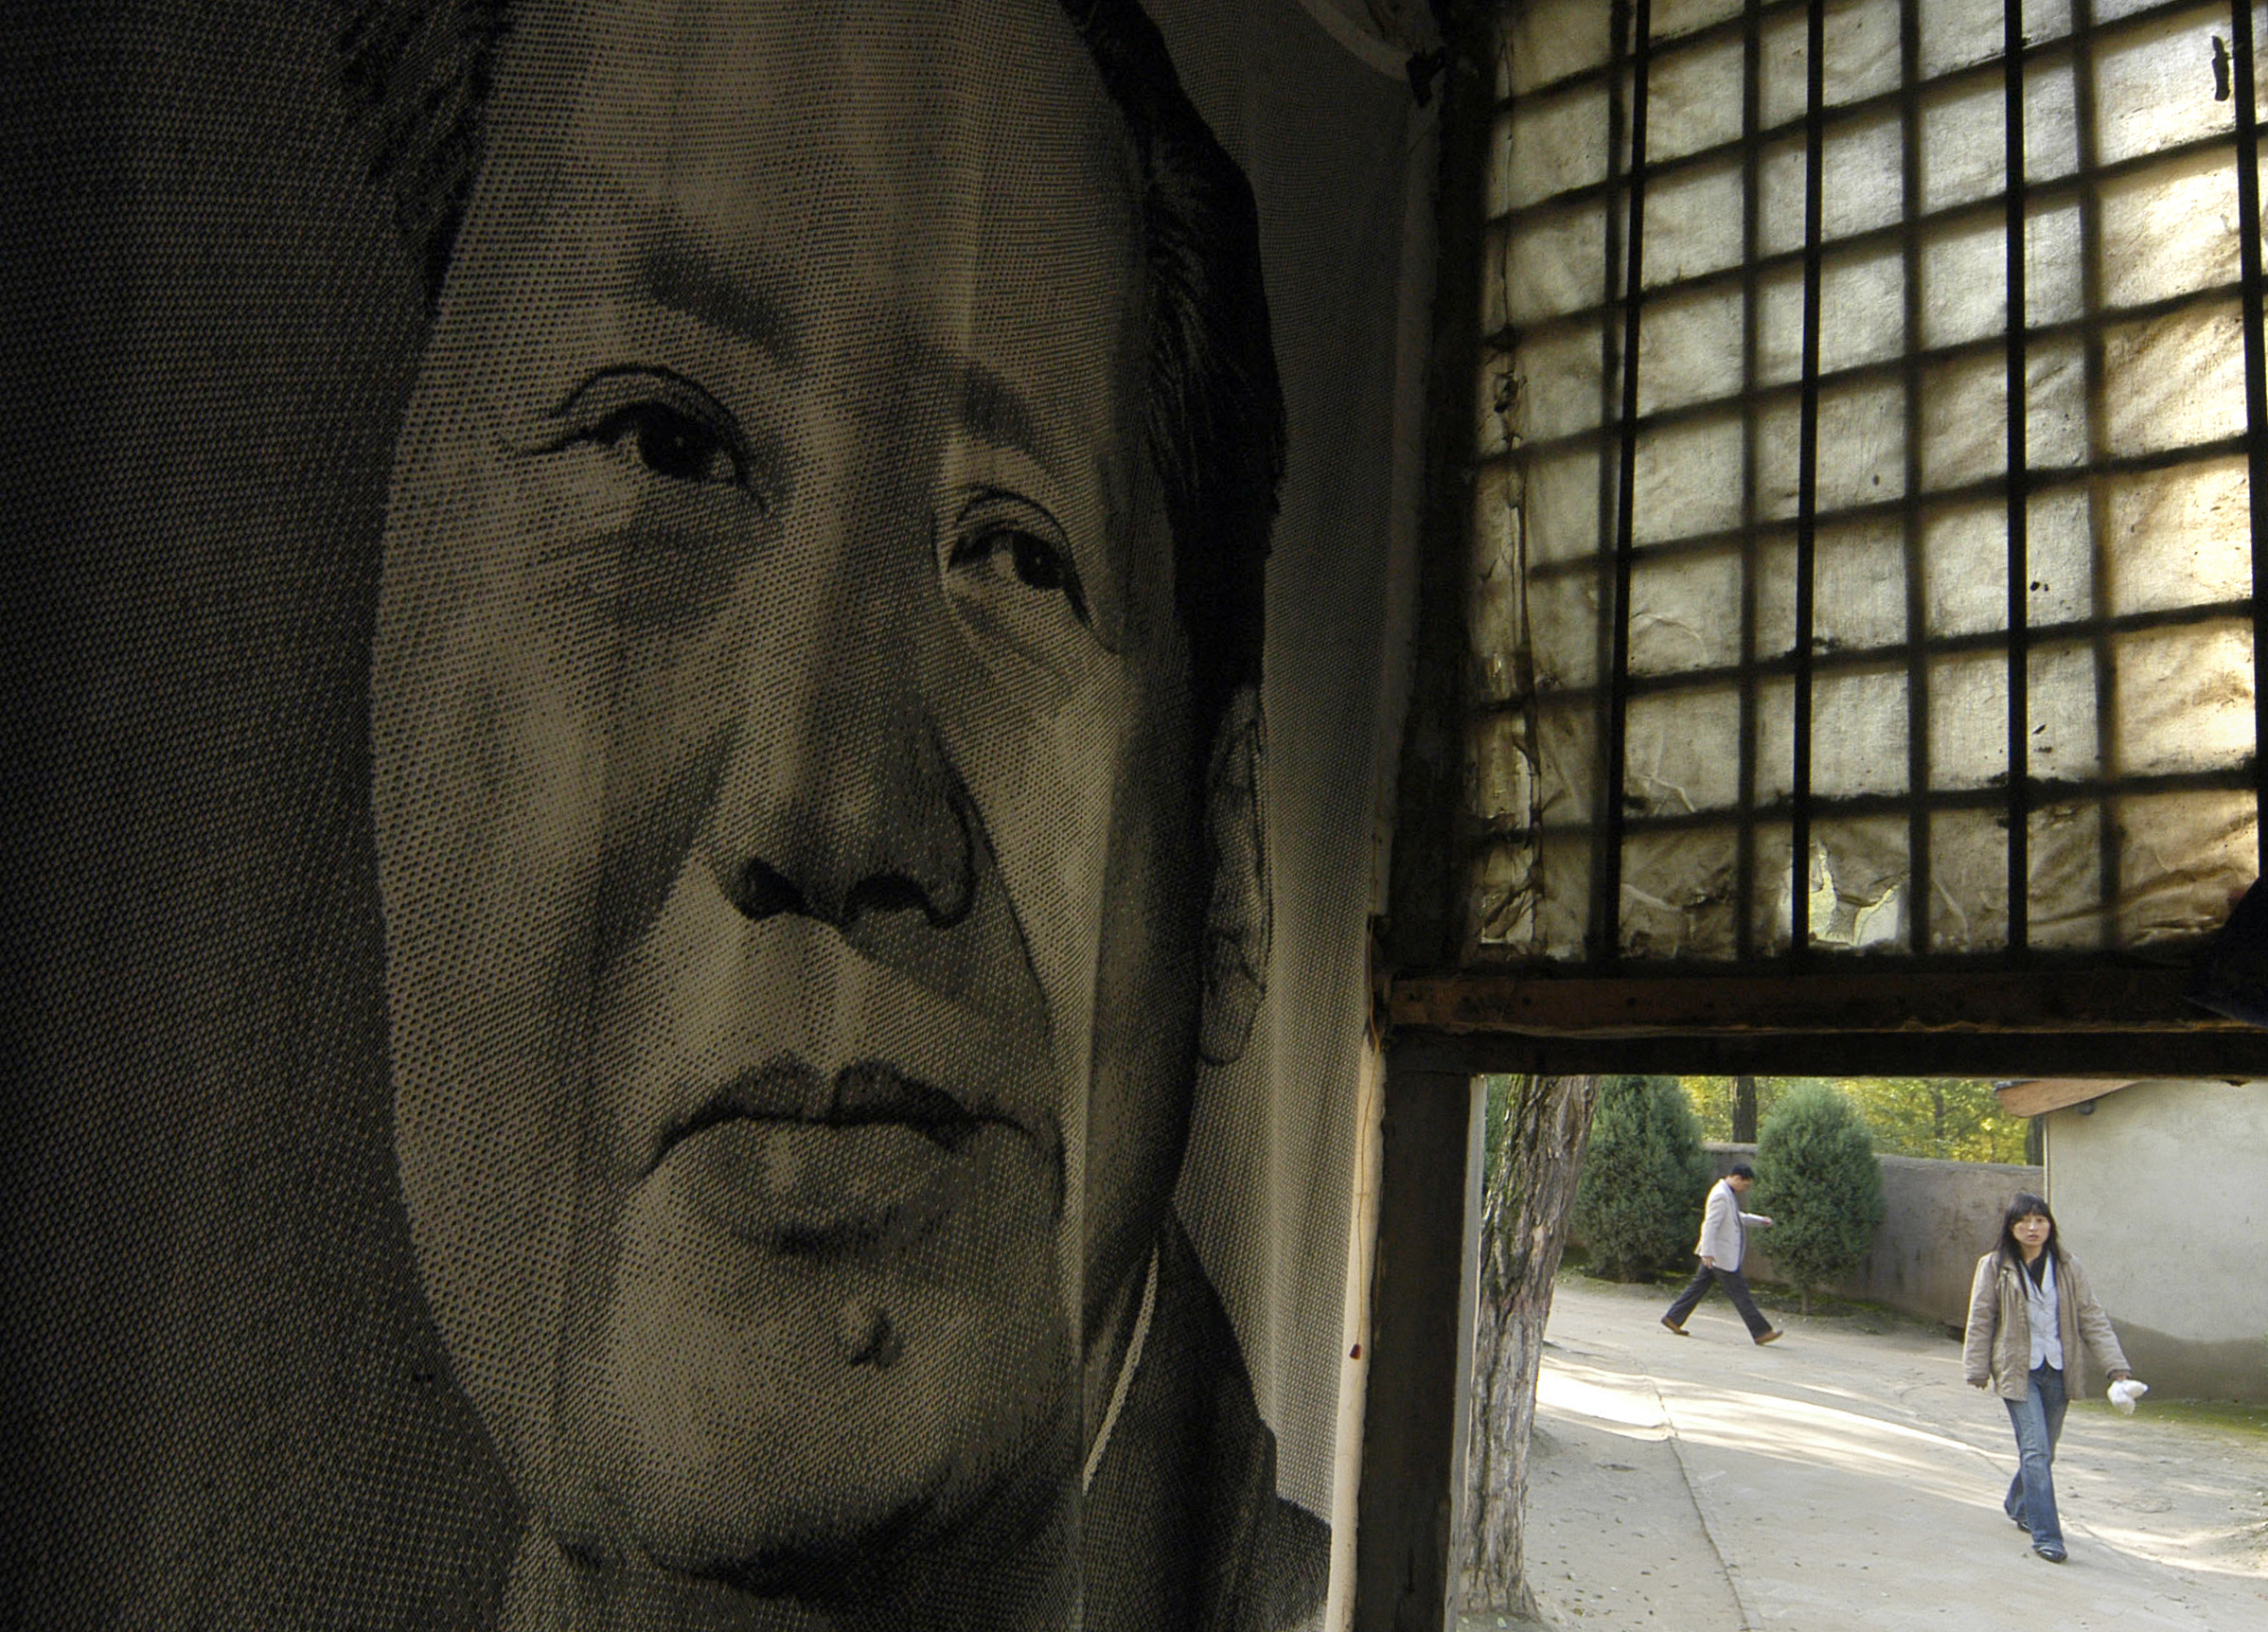 A portrait of Chinese leader Mao Zedong is seen inside a shop in Yan'an, northwest China's Shaanxi province October 15, 2007. Yan'an was a dusty but secure home to Mao from 1935 to 1947 and where he coined the motto "serve the people" and welded his party into a fighting force capable of winning the civil war. The caves that sheltered Mao and his Communists from attacking Japanese and Chinese enemies in the 1930s are now museums, but many residents of this loess plateau region still prefer the comfort of a cave. REUTERS/Stringer (CHINA)